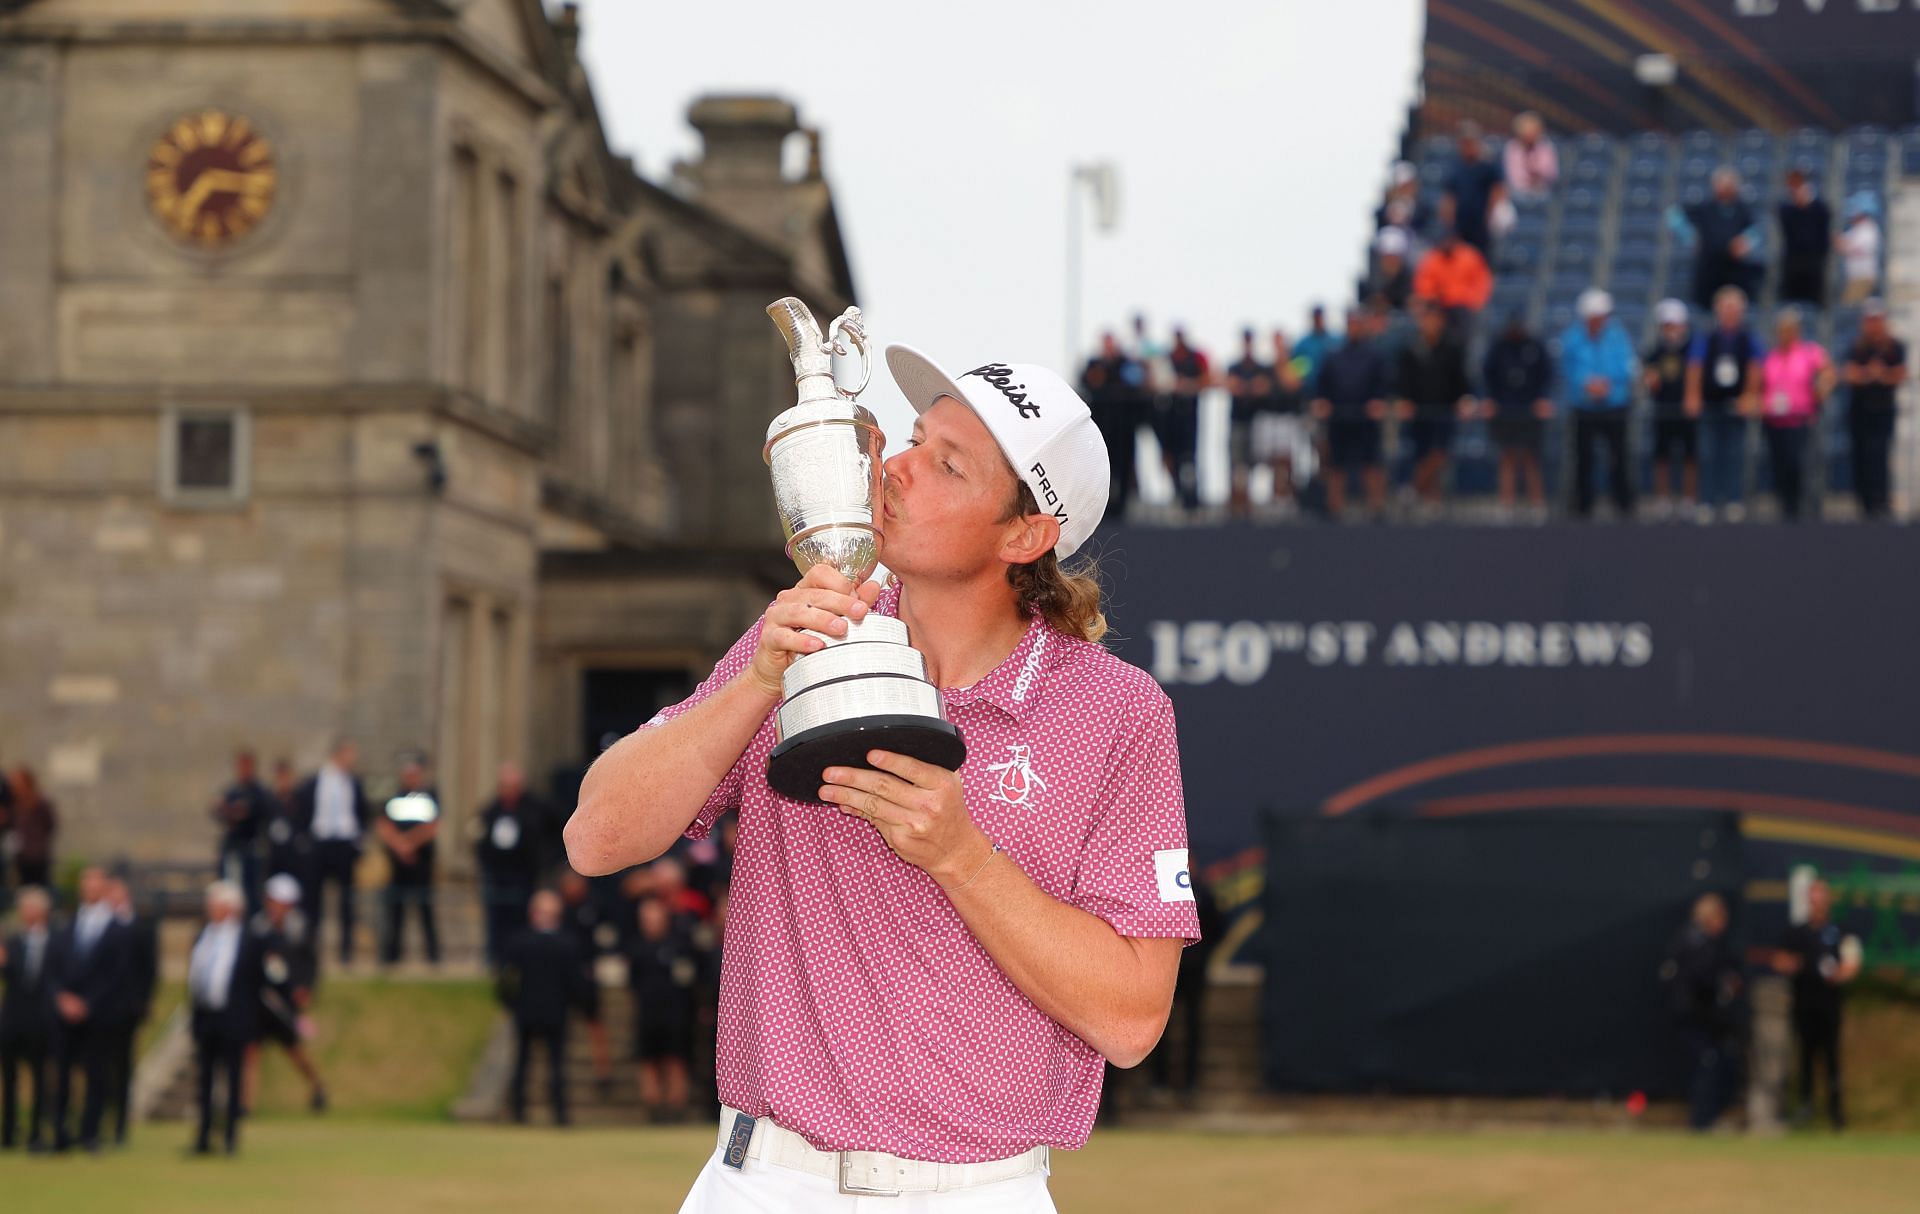 Cameron Smith kisses the Claret Jug after winning the Open Championship 2022